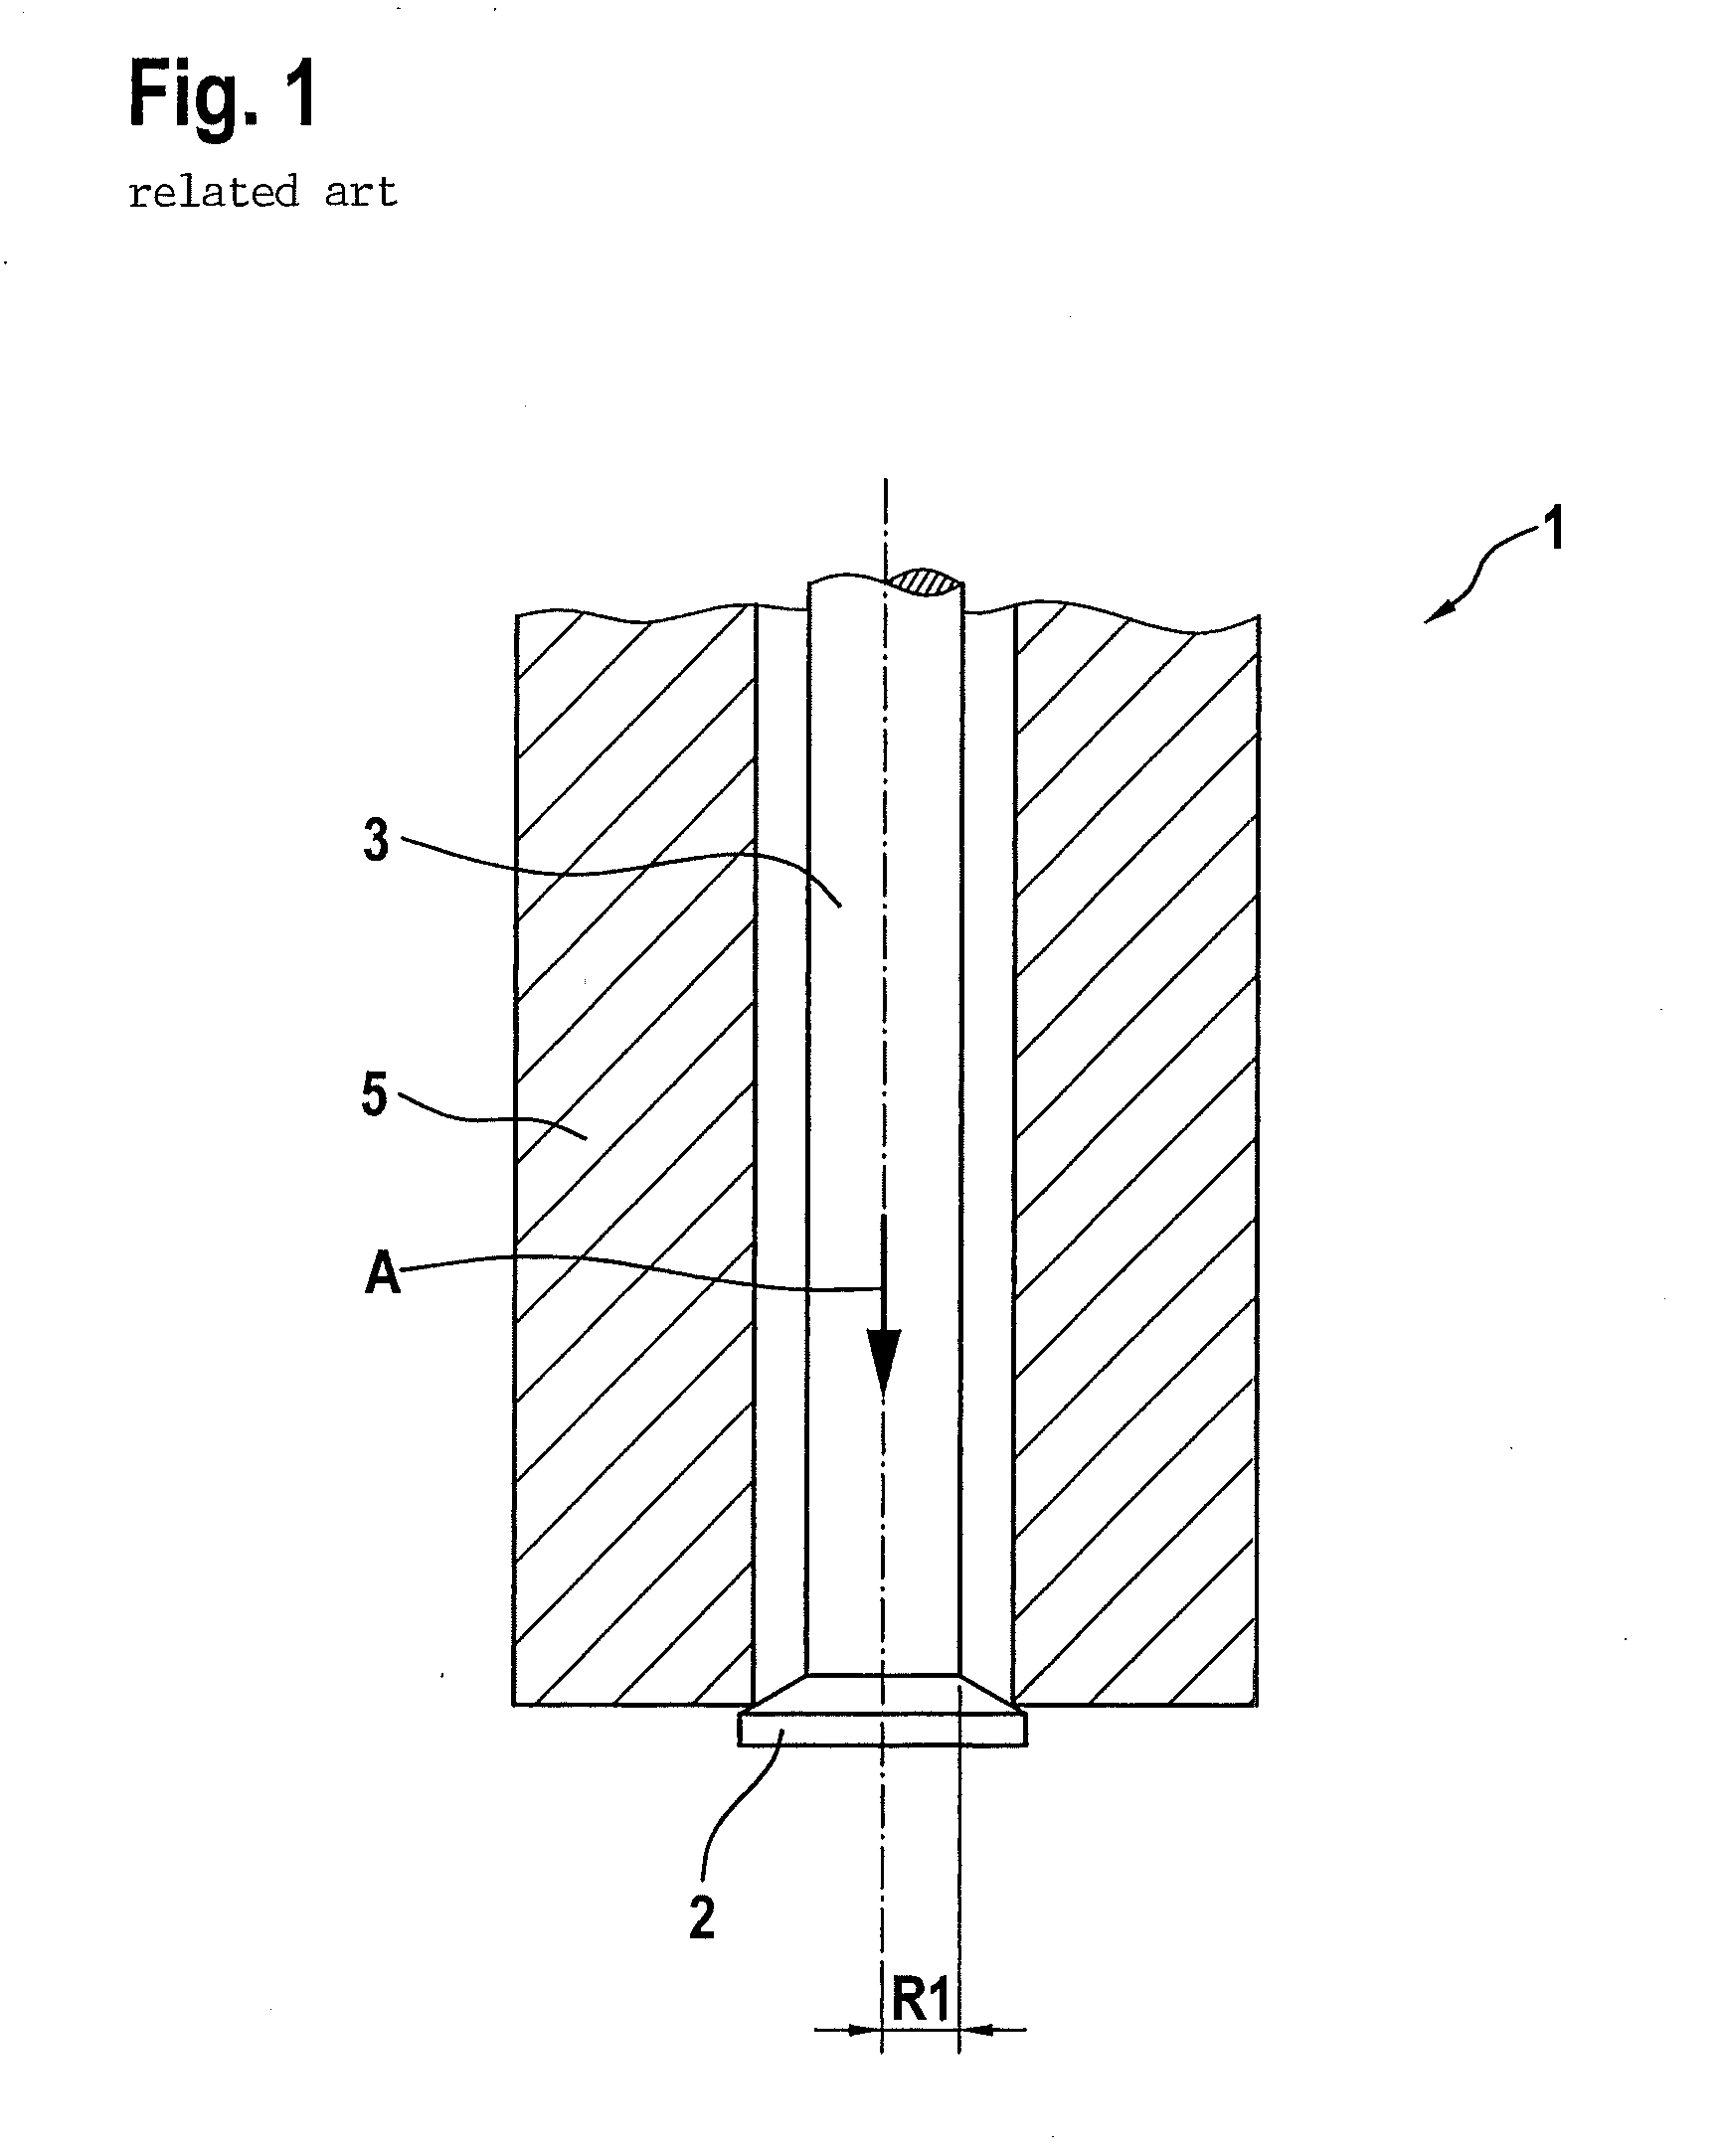 Gas injector having a dual valve needle